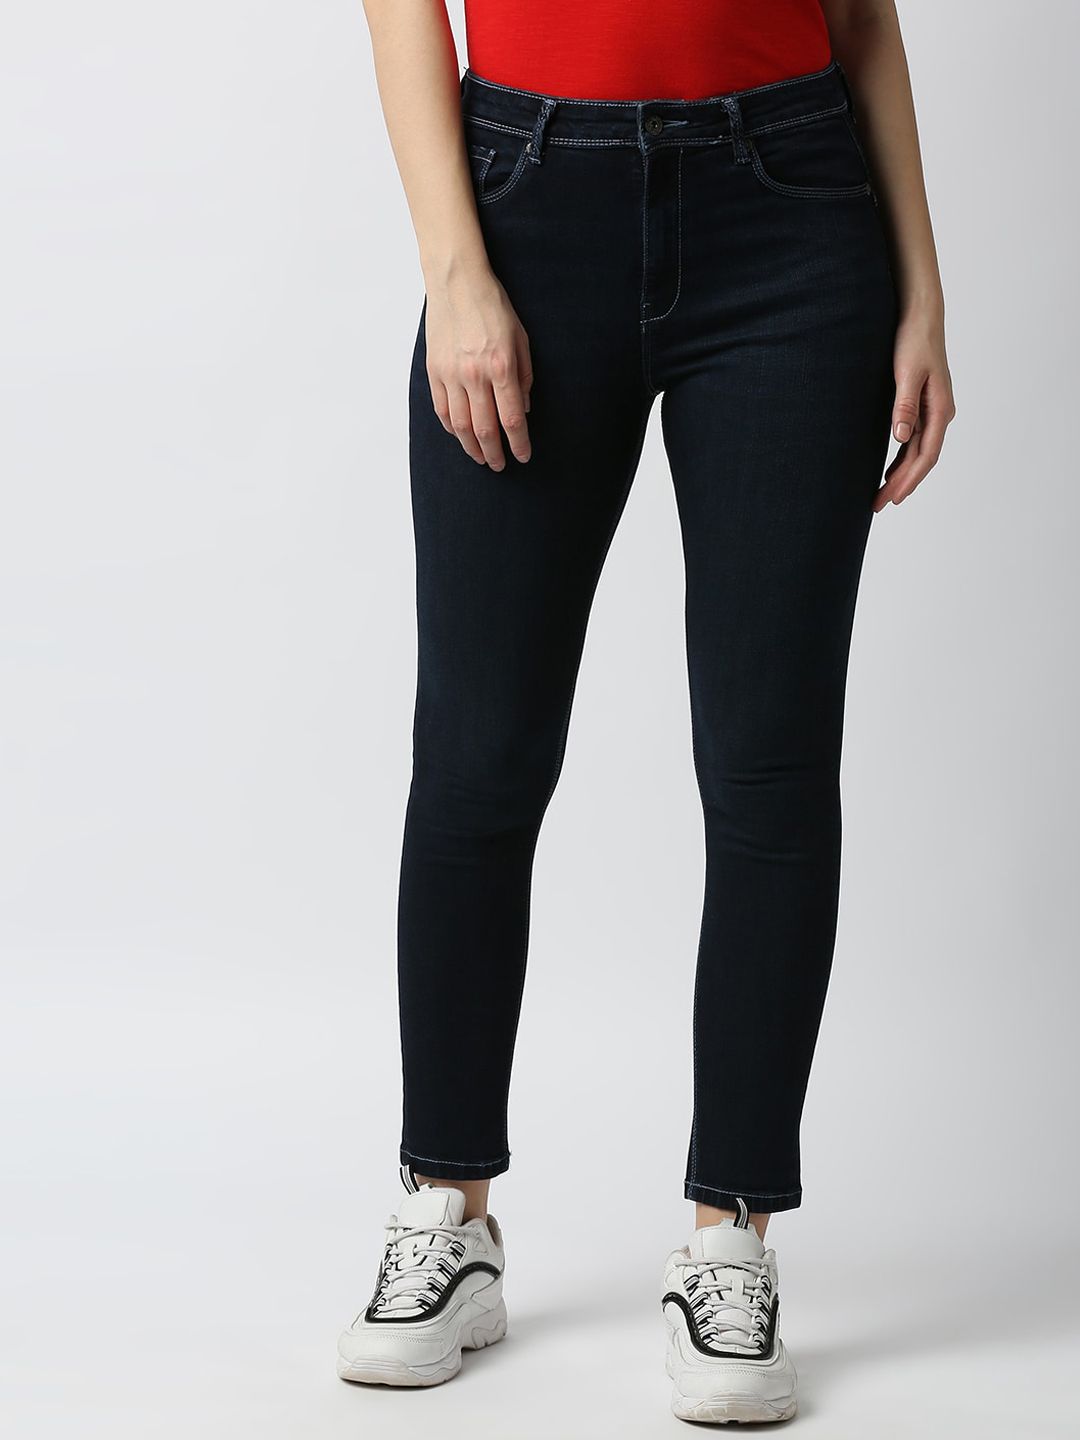 Pepe Jeans Women Blue Skinny Fit Stretchable Jeans Price in India